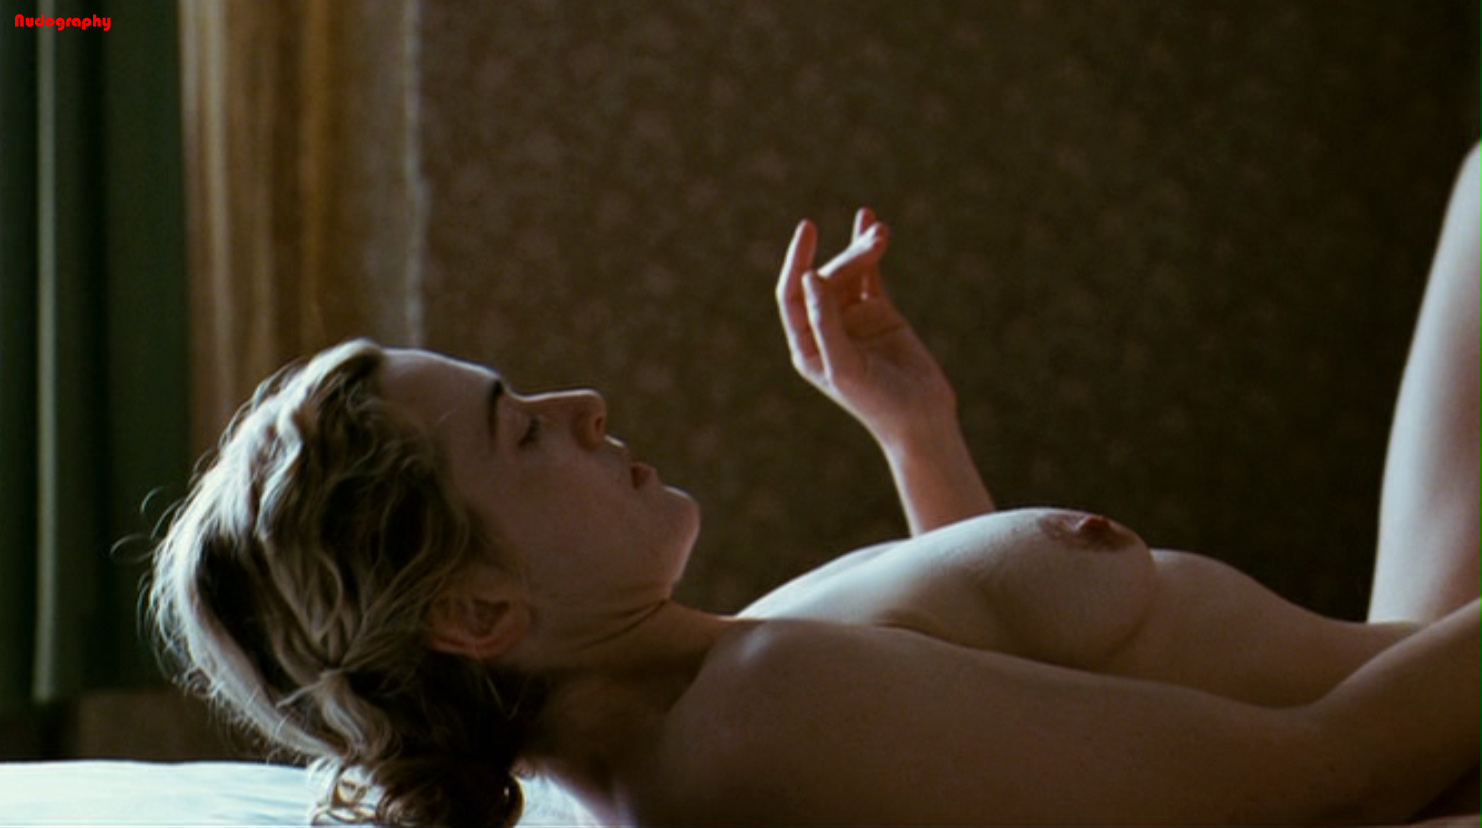 Kate Winslet Nude From The Reader Picture 2009 3 Original Kate Winslet The Reader 009